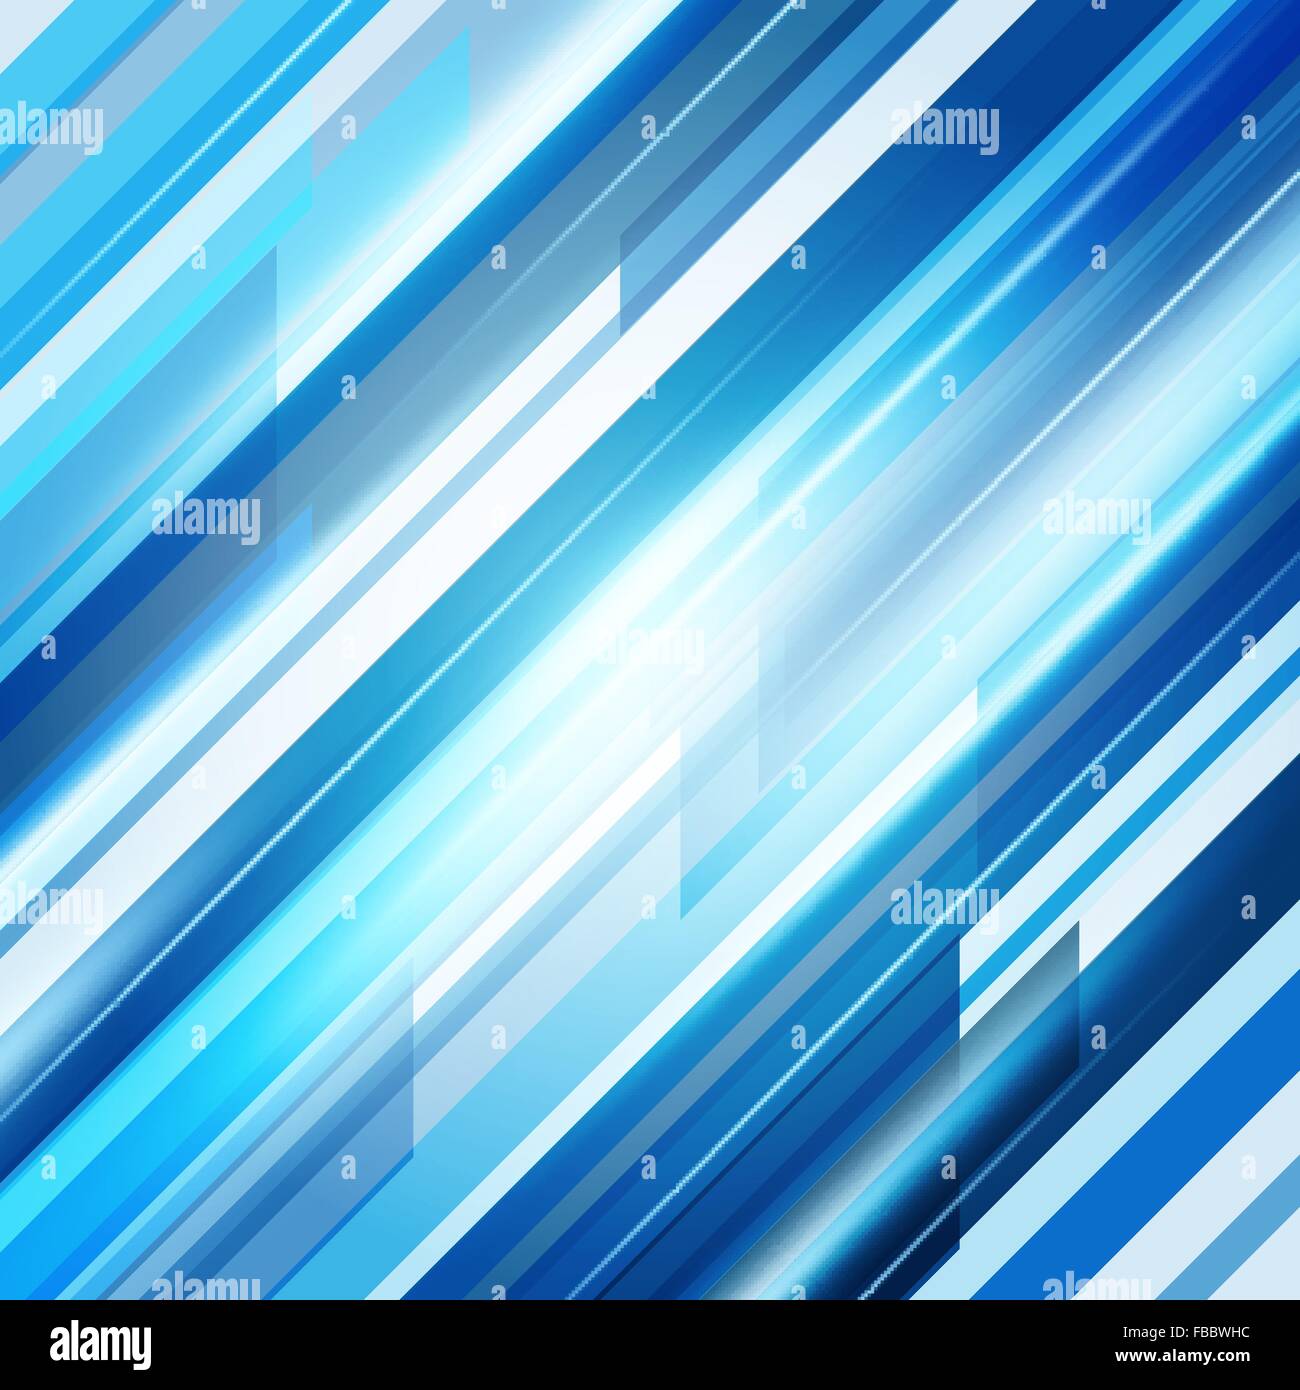 Download 660 Background Blue Picture HD Paling Keren